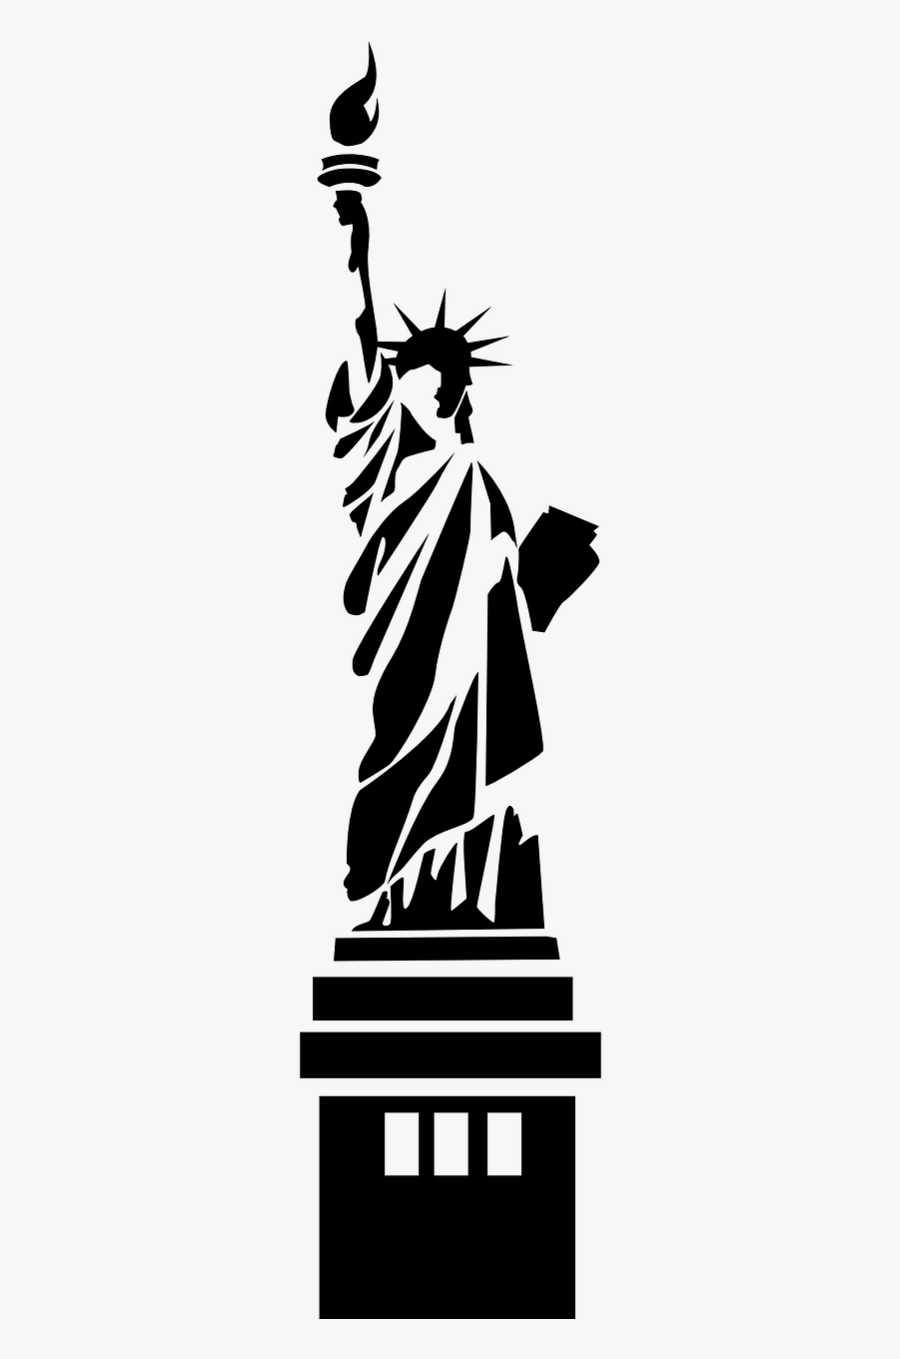 Psychology Today - Statue Of Liberty Black And White Png, Transparent Clipart